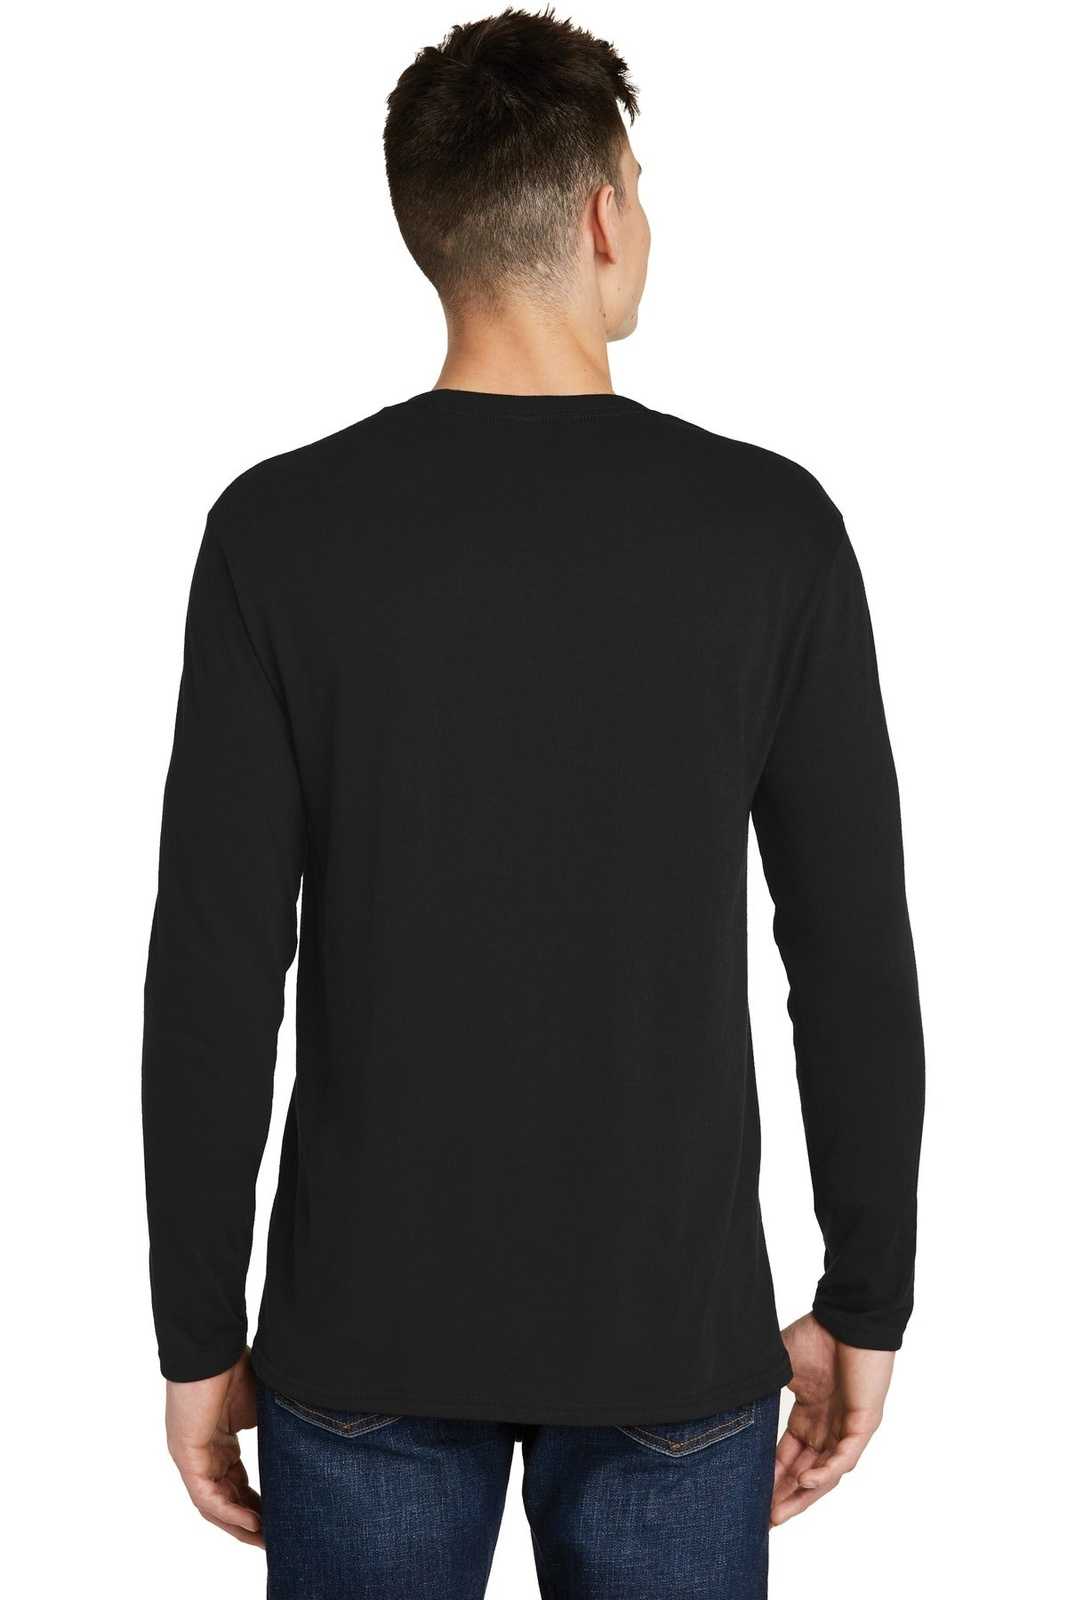 District DT6200 Very Important Tee Long Sleeve - Black - HIT a Double - 1